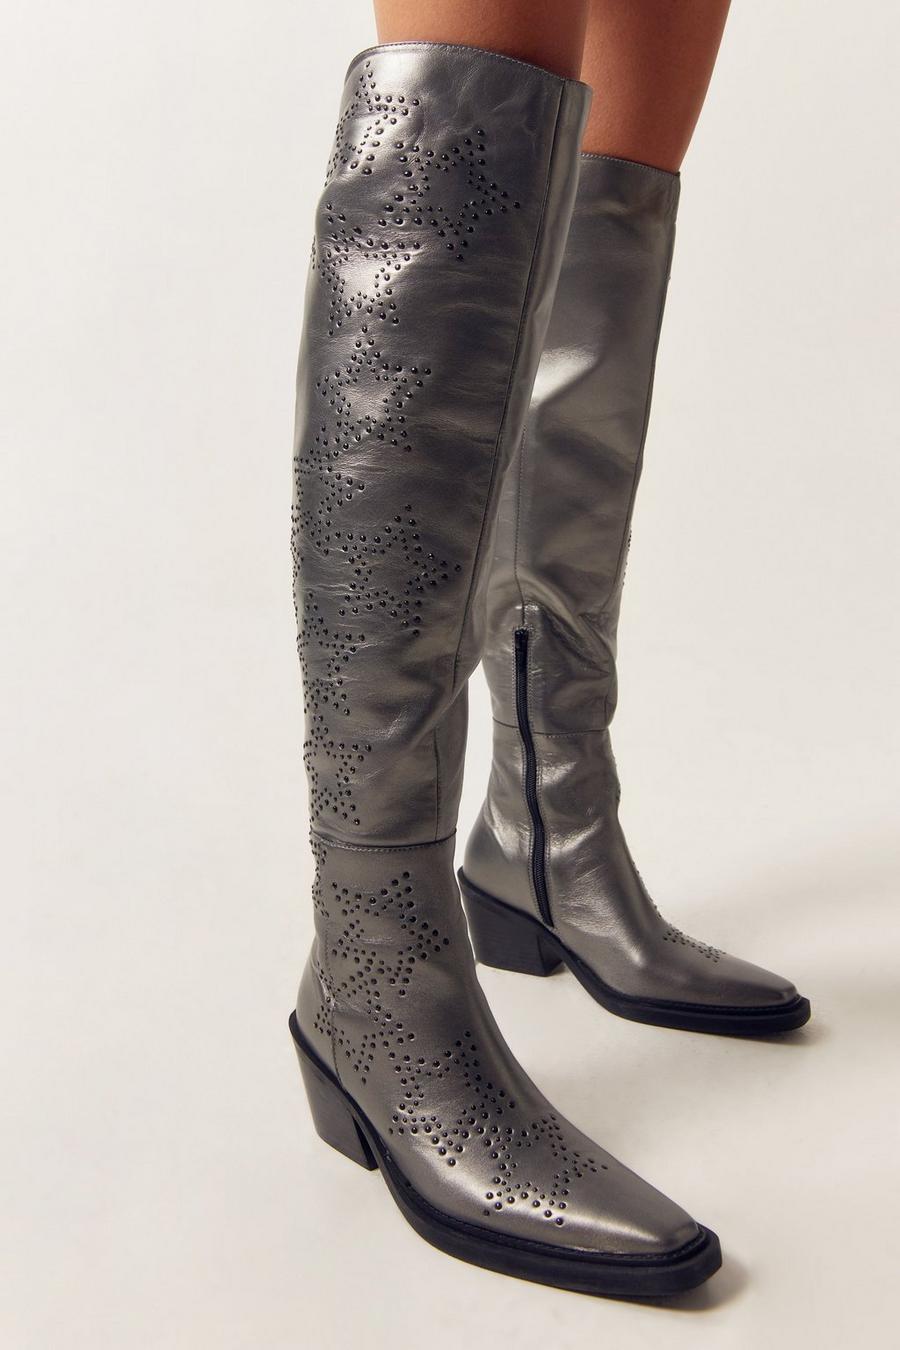 Real Leather Metallic Star Studed Over The Knee Cowboy Boots